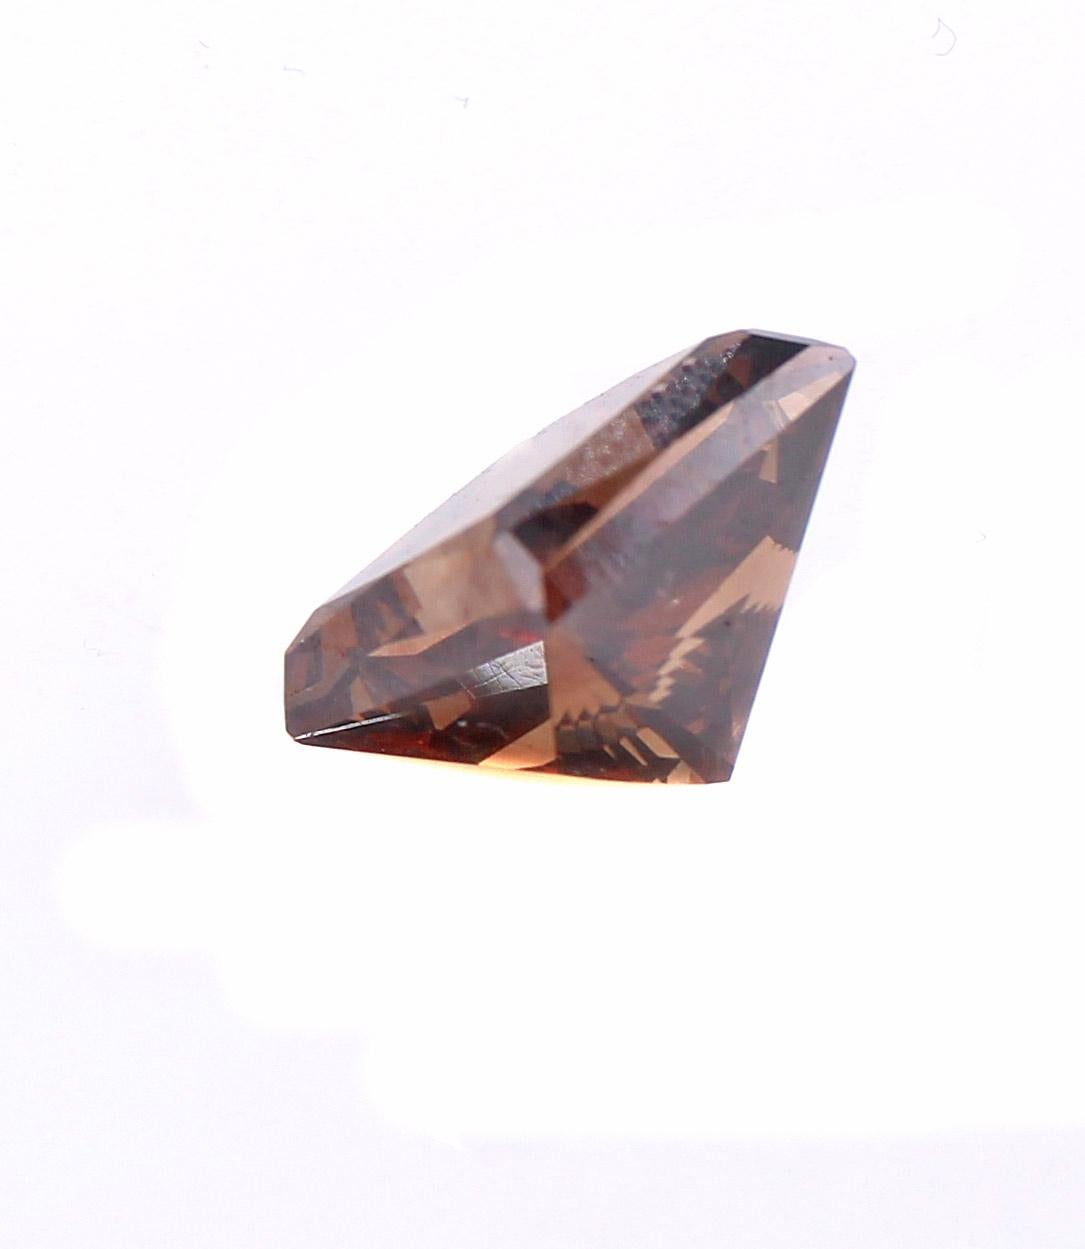 This perfectly cut 7.07 carat princess cut diamond displays a wonderful chocolate brown color with a hue of orange. Accompanied by a report from the GIA stating that the natural fancy color diamond is graded as Fancy Dark Orange-Brown with a clarity